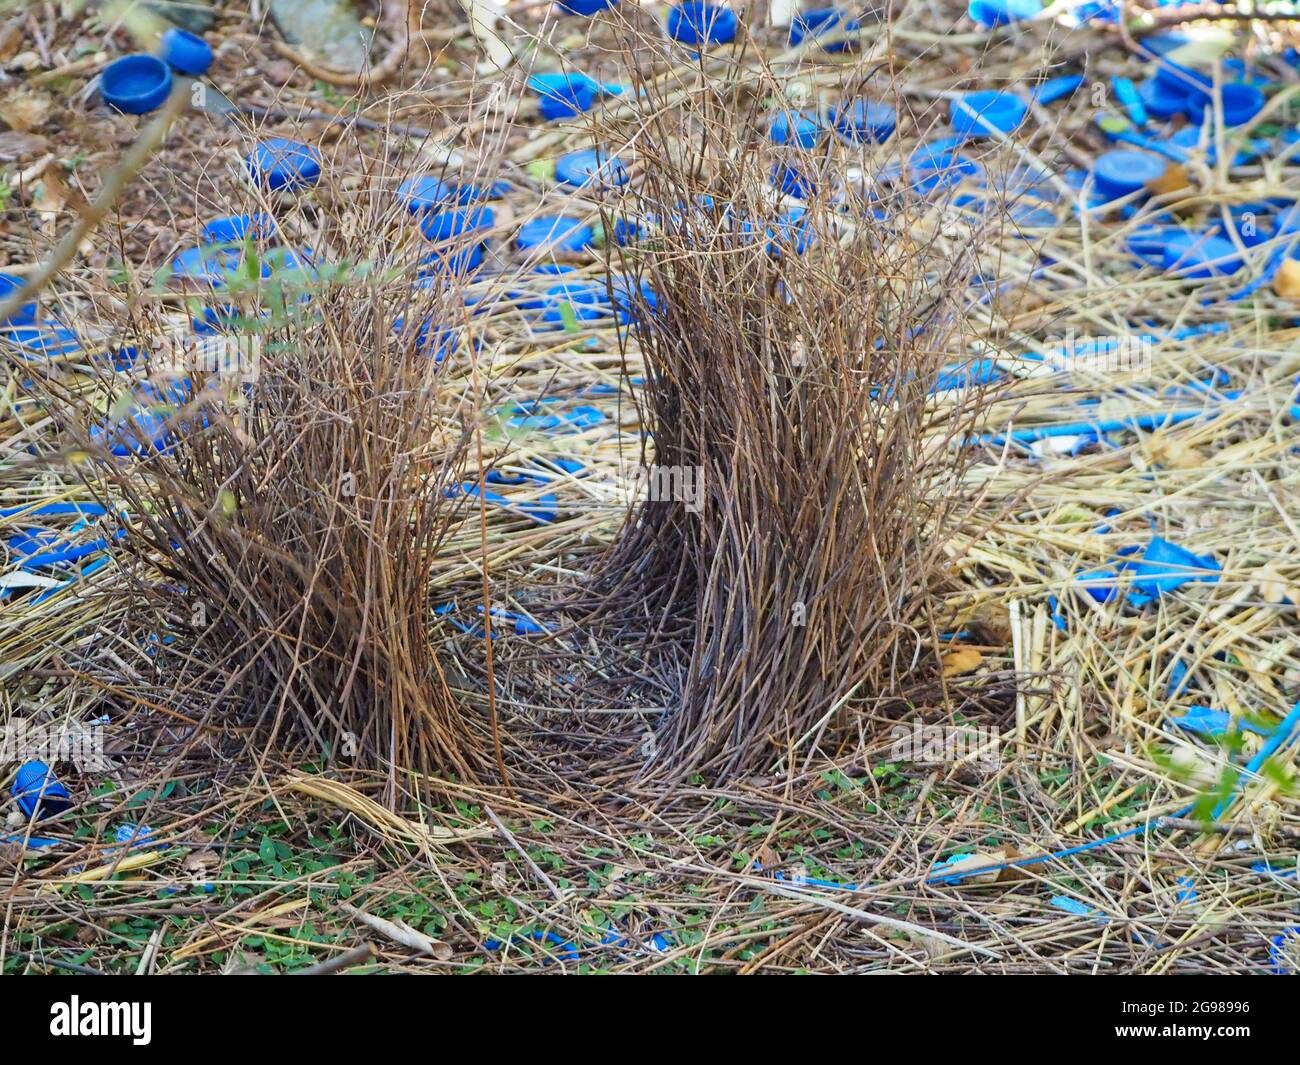 Two parallel walls of sticks are built the bower of a male Satin Bowerbird, built to impress prospective females, decorated with blue items Stock Photo